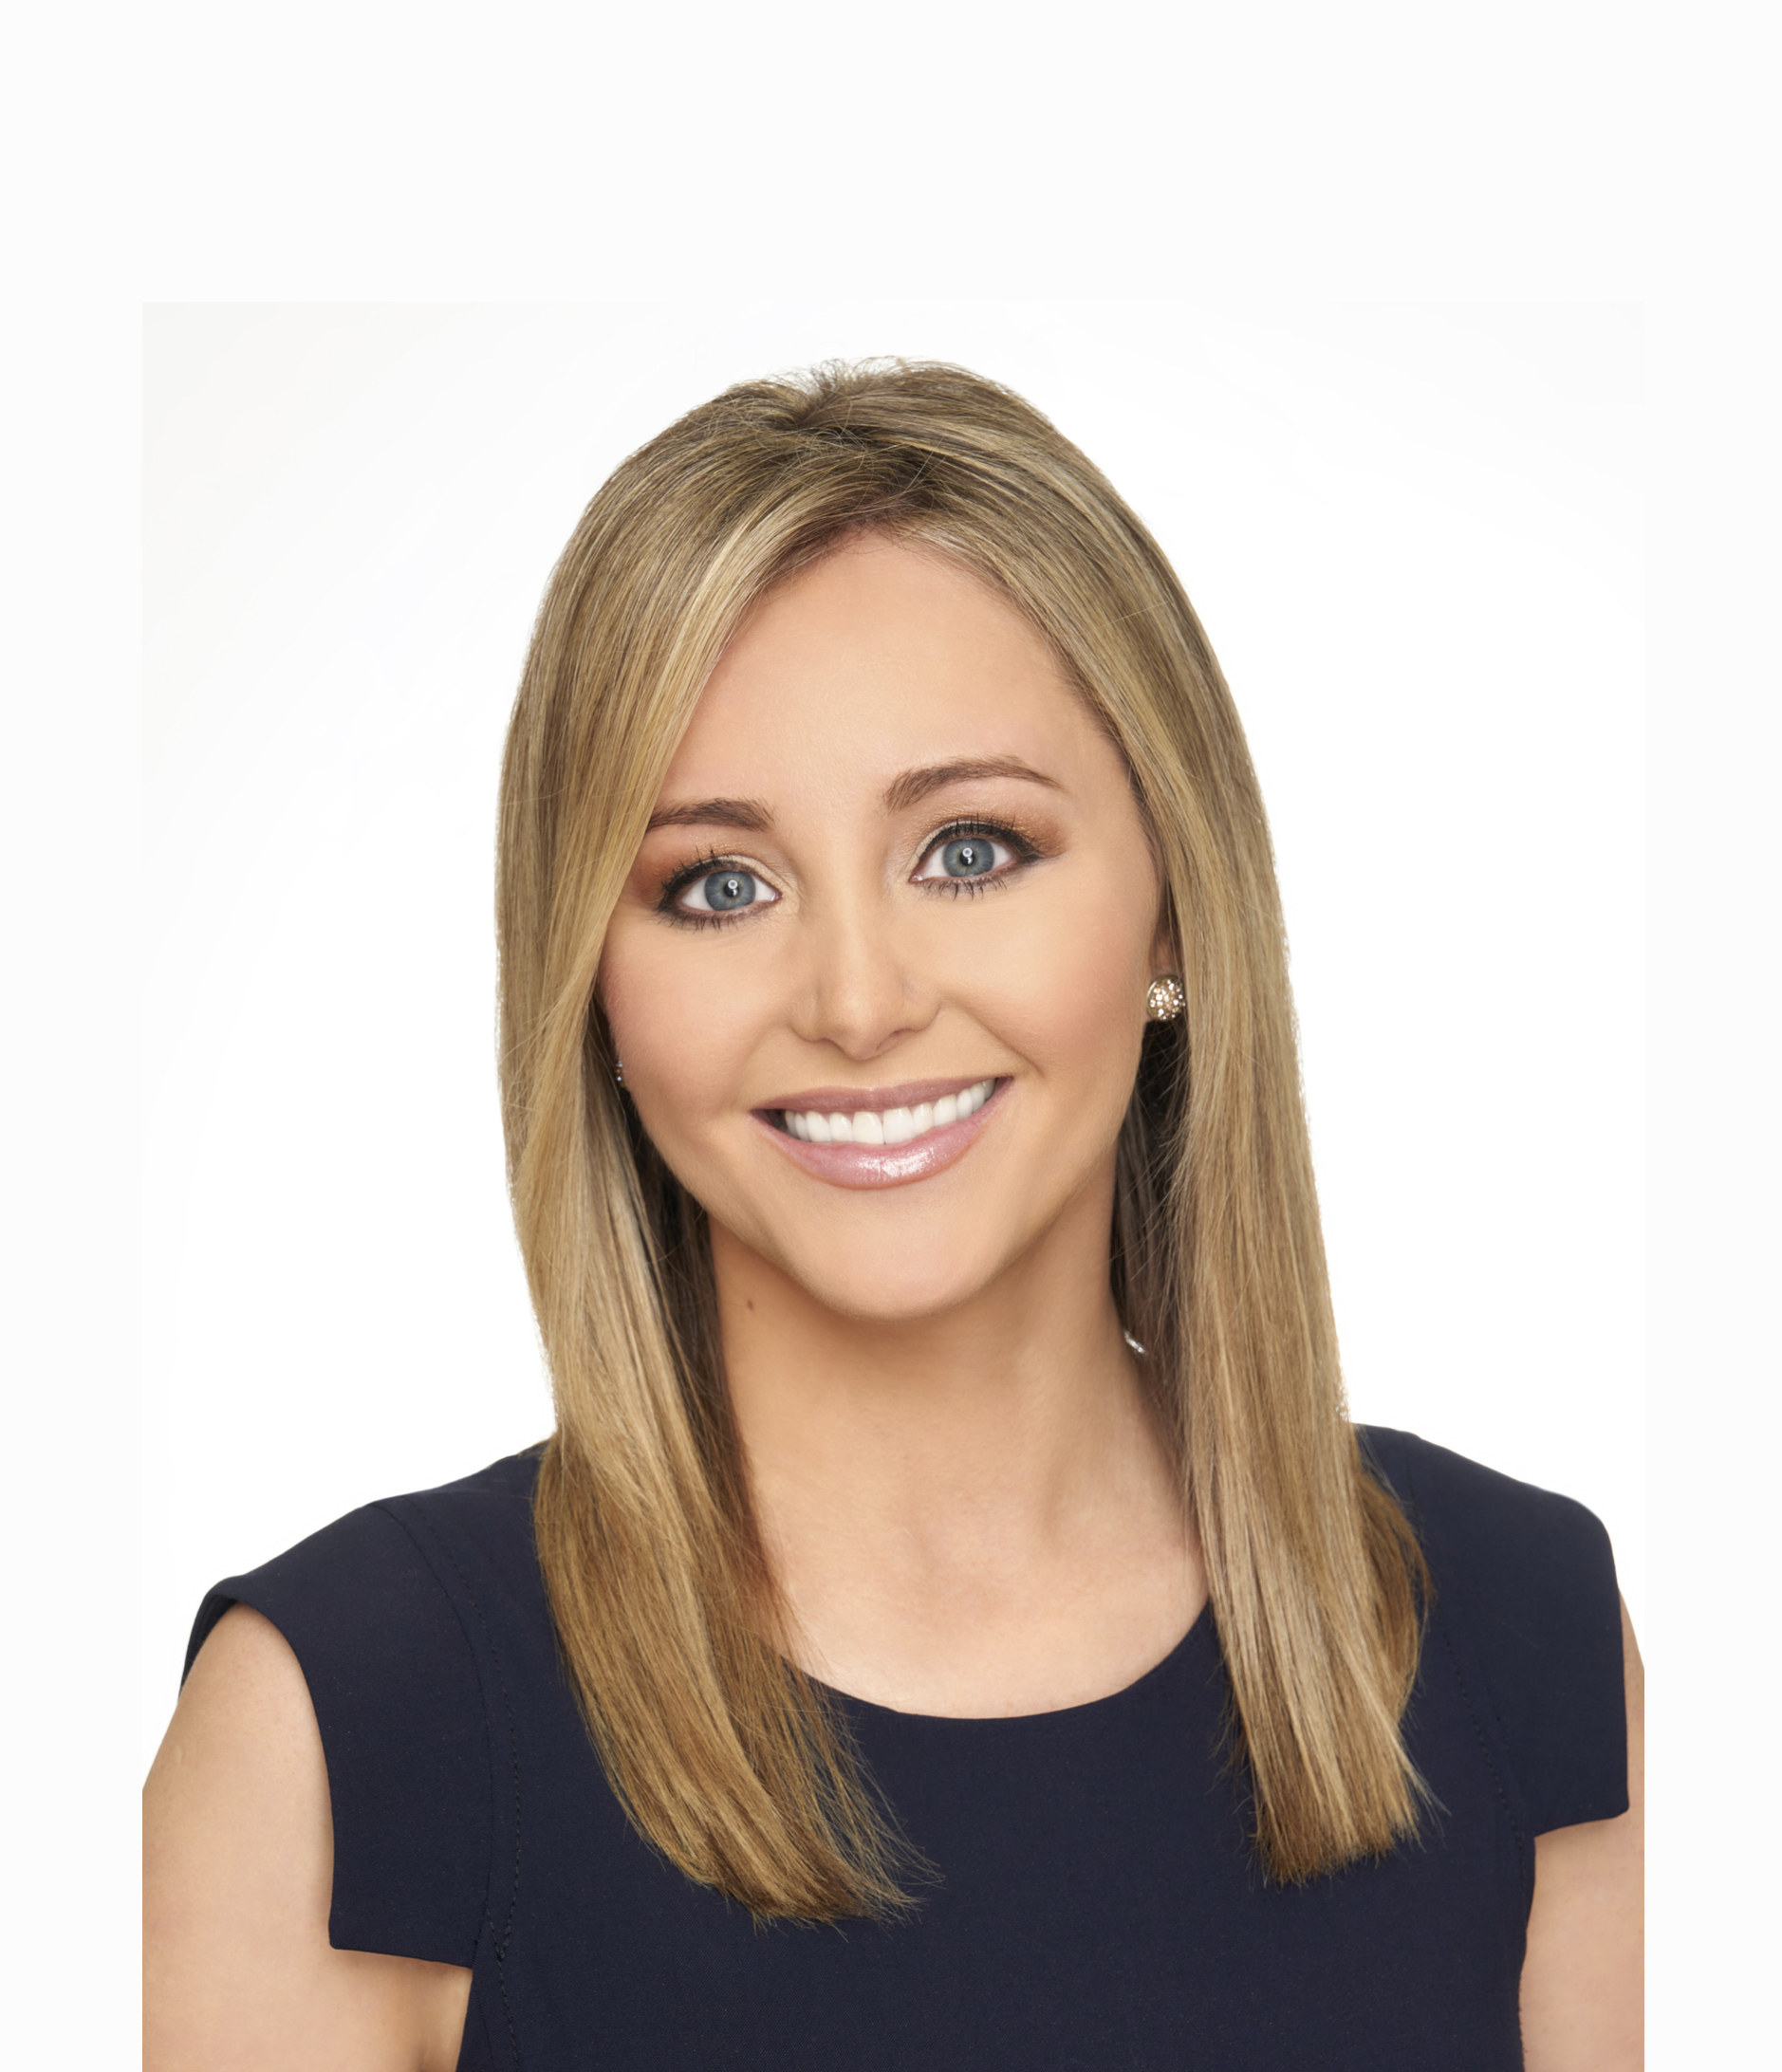 Media Movers Q&A: Taylor Riggs of Fox Business' 'Big Money Show'